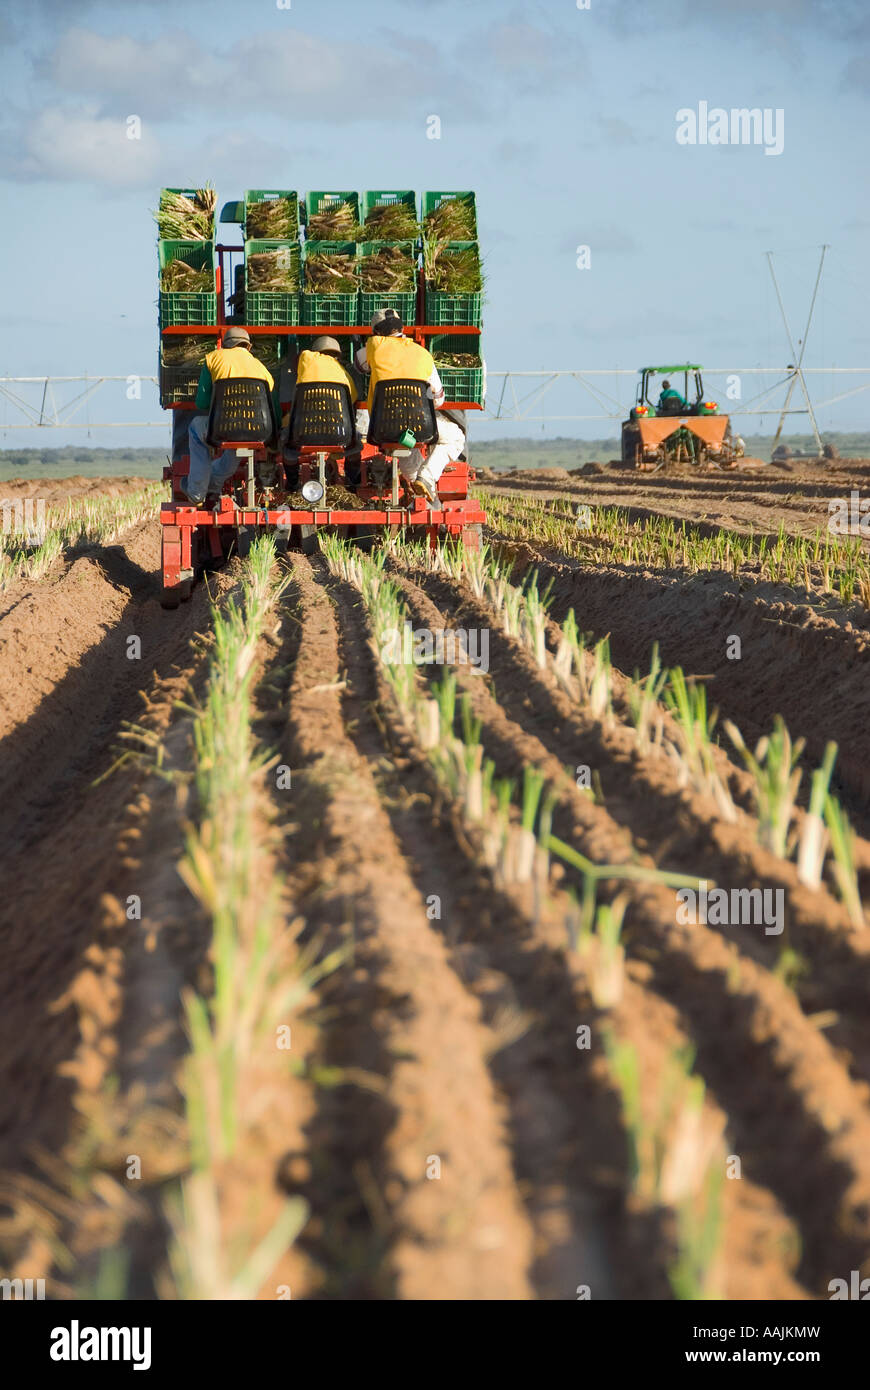 a tractor cultivating the field, Low Angle View Stock Photo